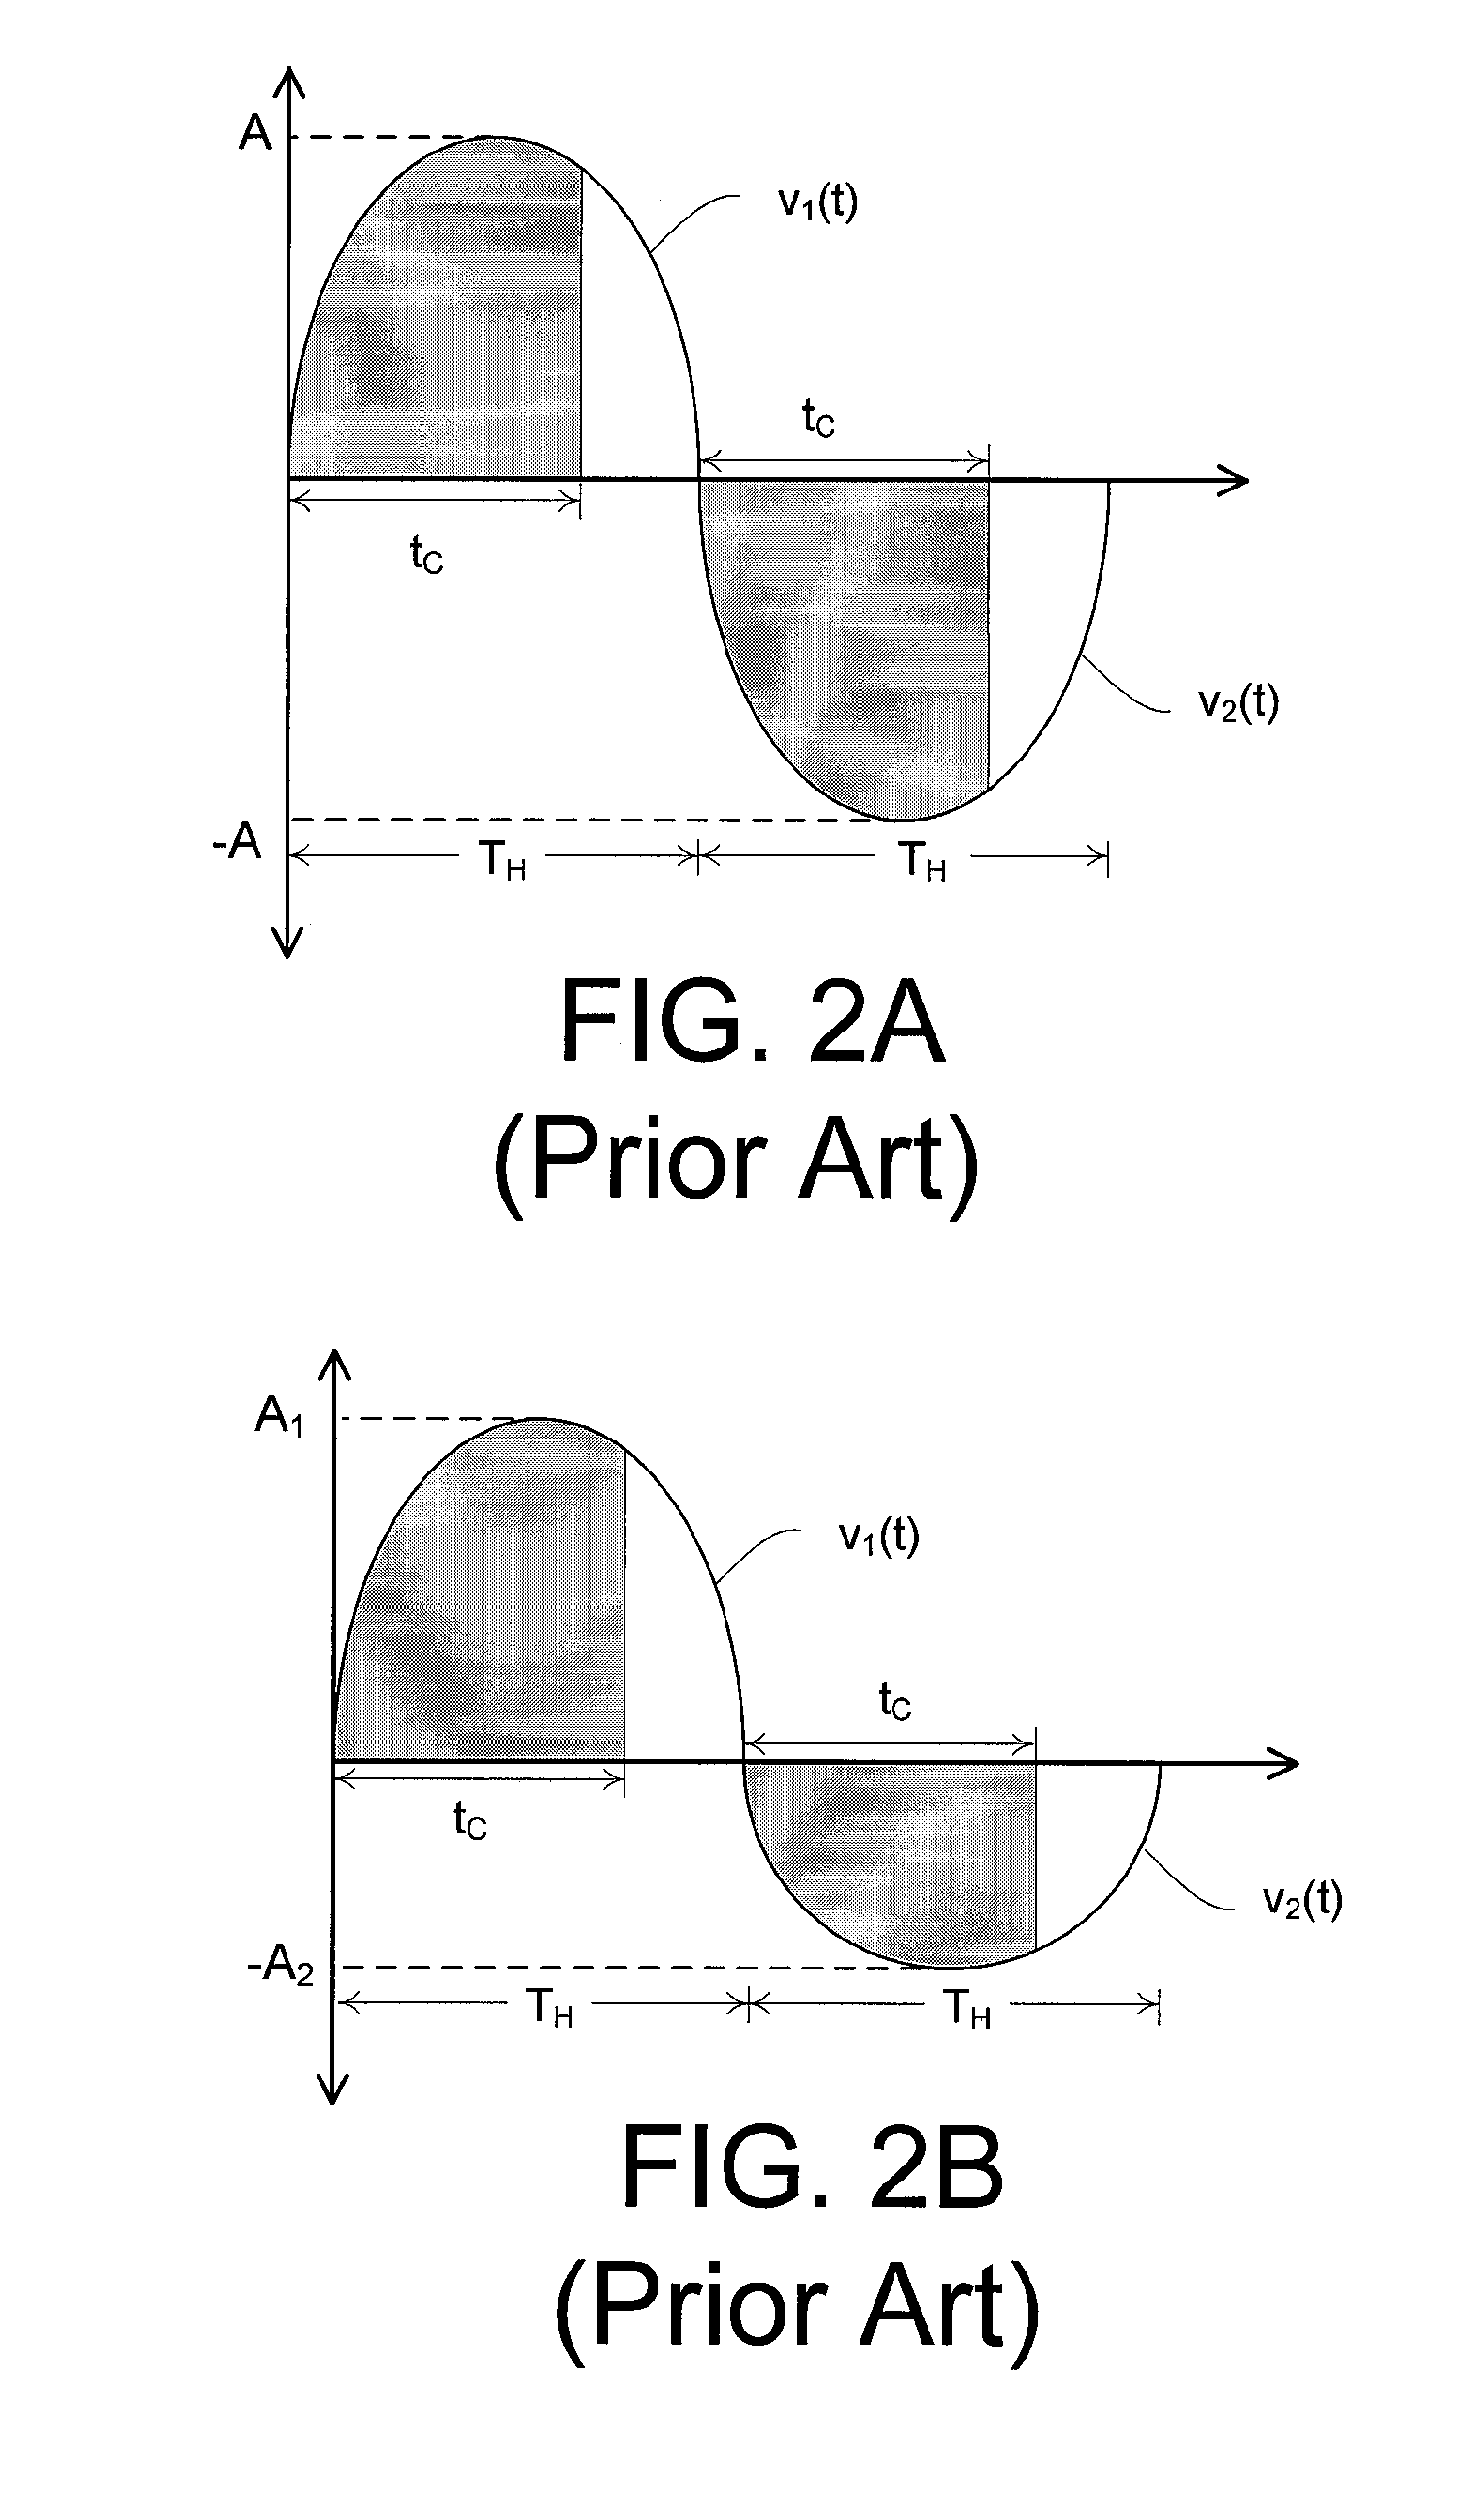 Apparatus and methods for regulating delivery of electrical energy